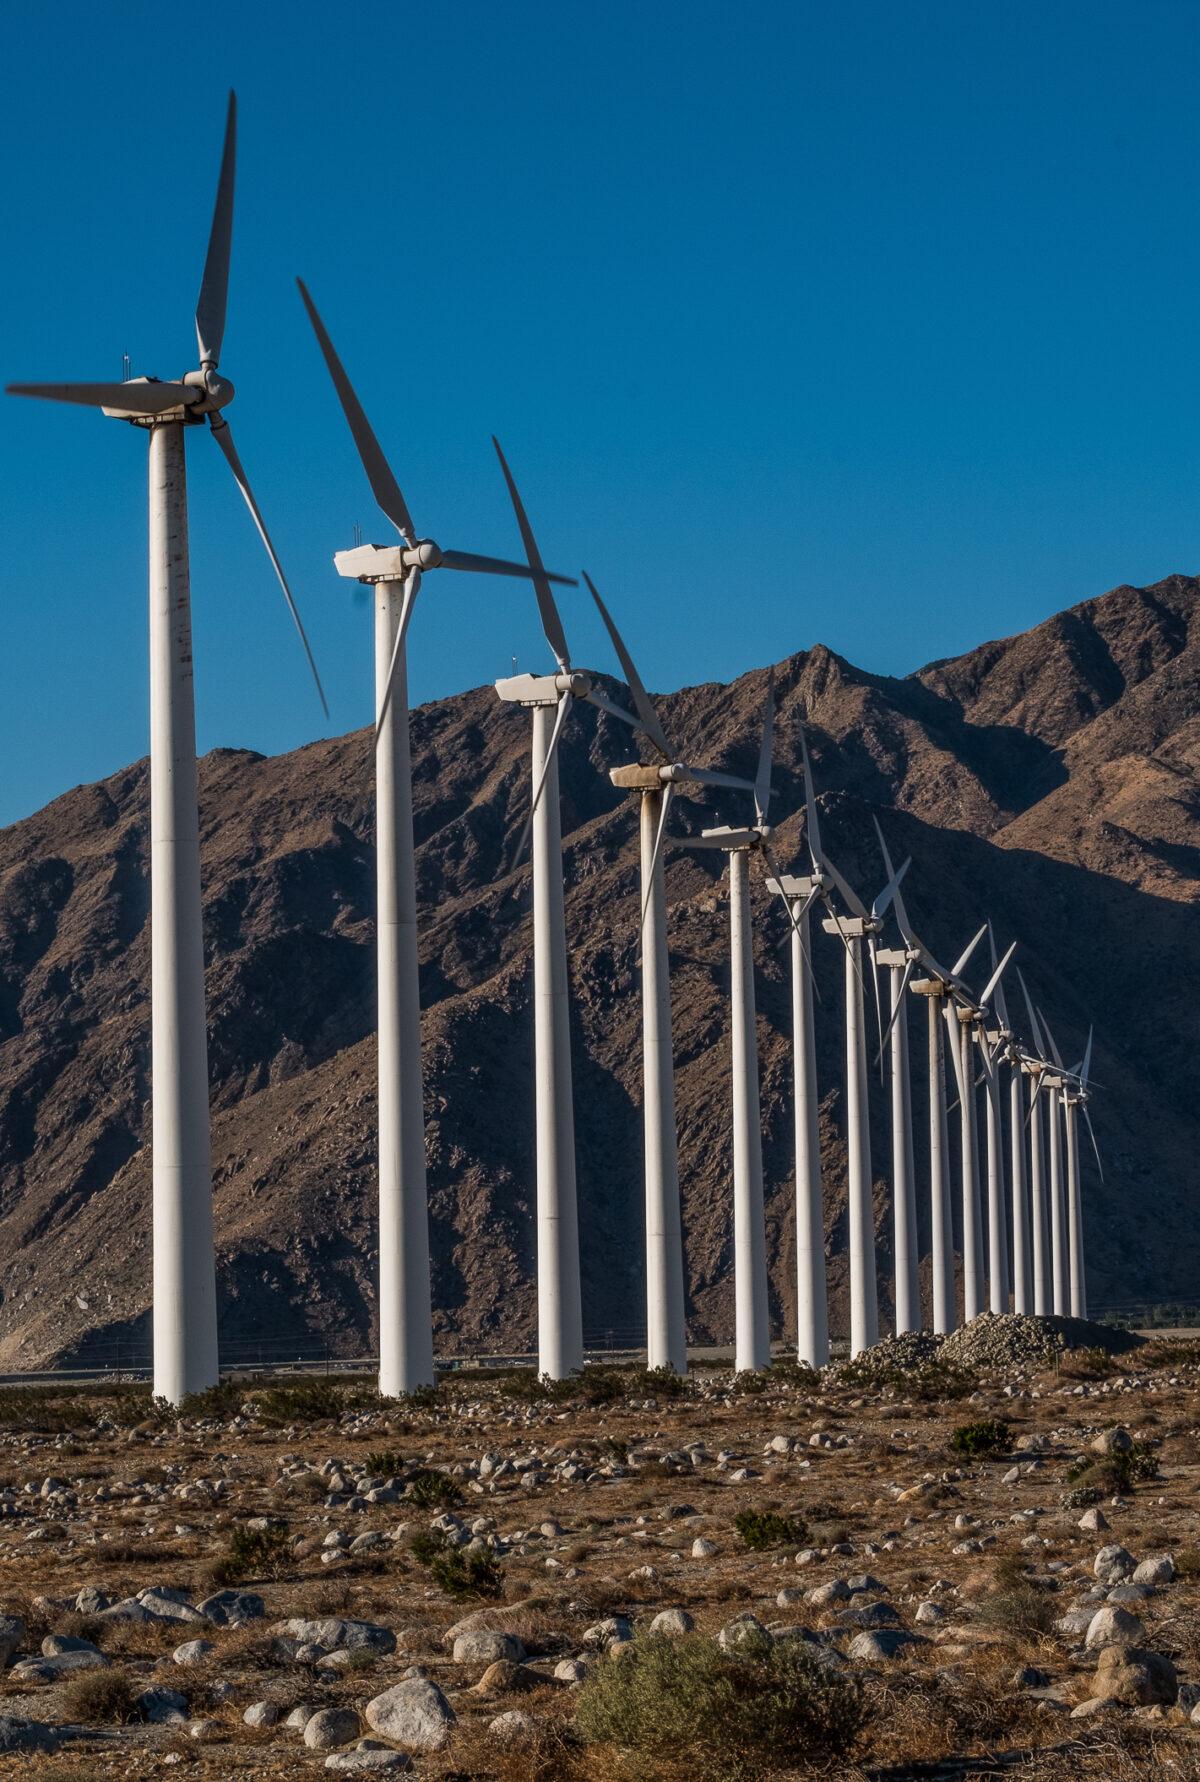  A wind farm outside of Palm Springs, Calif., on May 26, 2022. (John Fredricks/The Epoch Times)